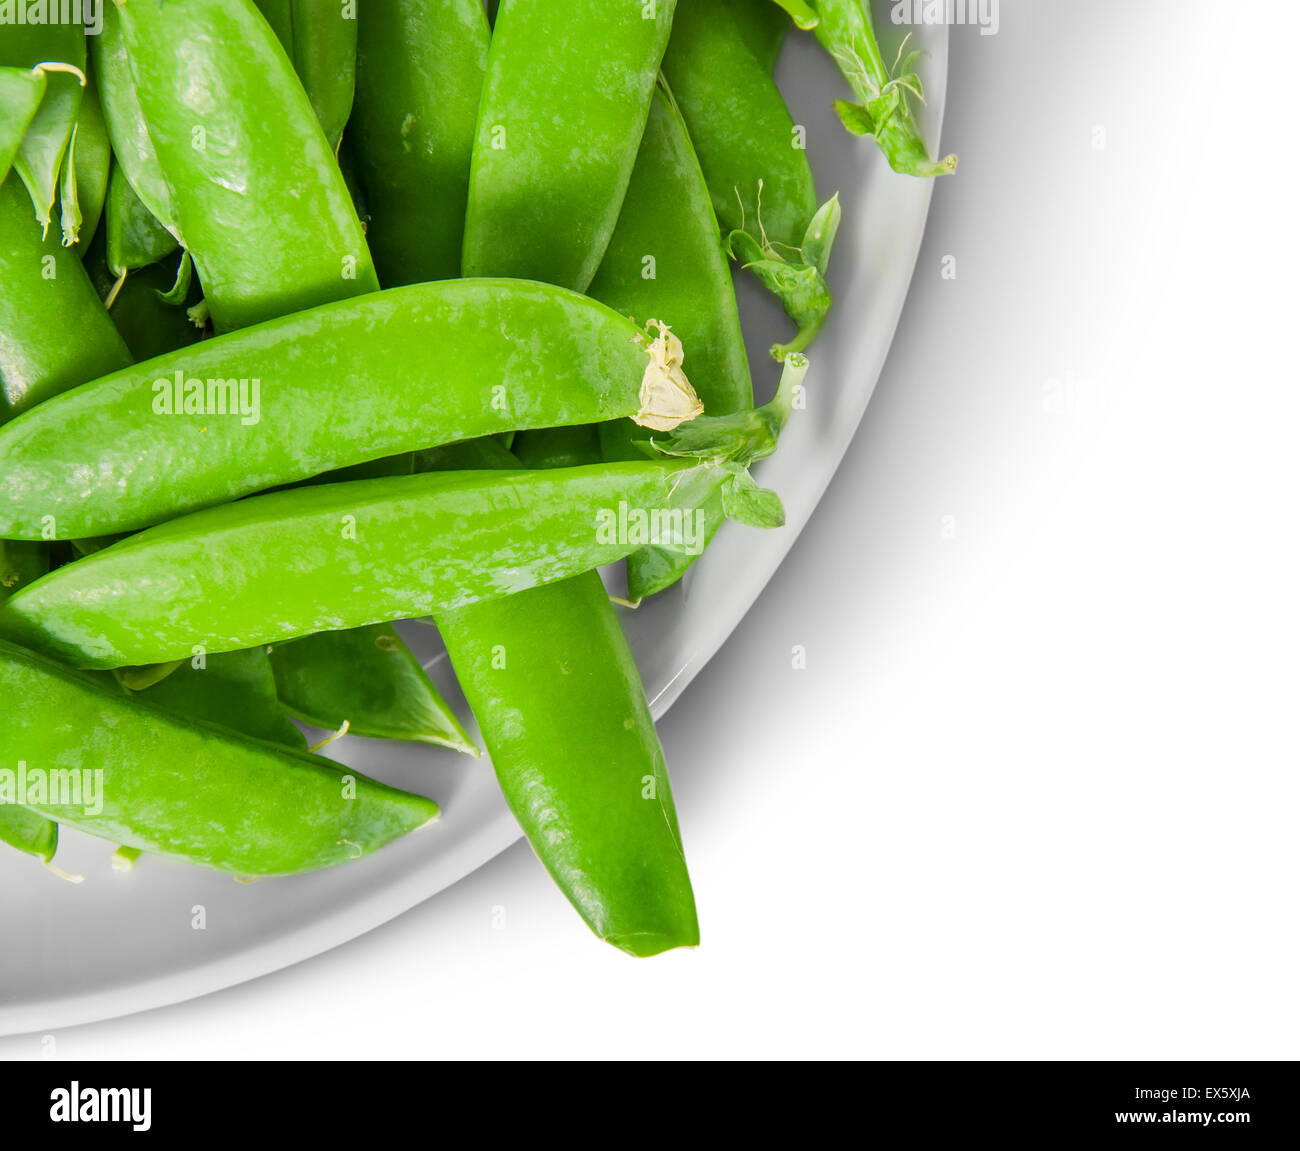 Closeup green peas in pods on white plate top view isolated on white background Stock Photo